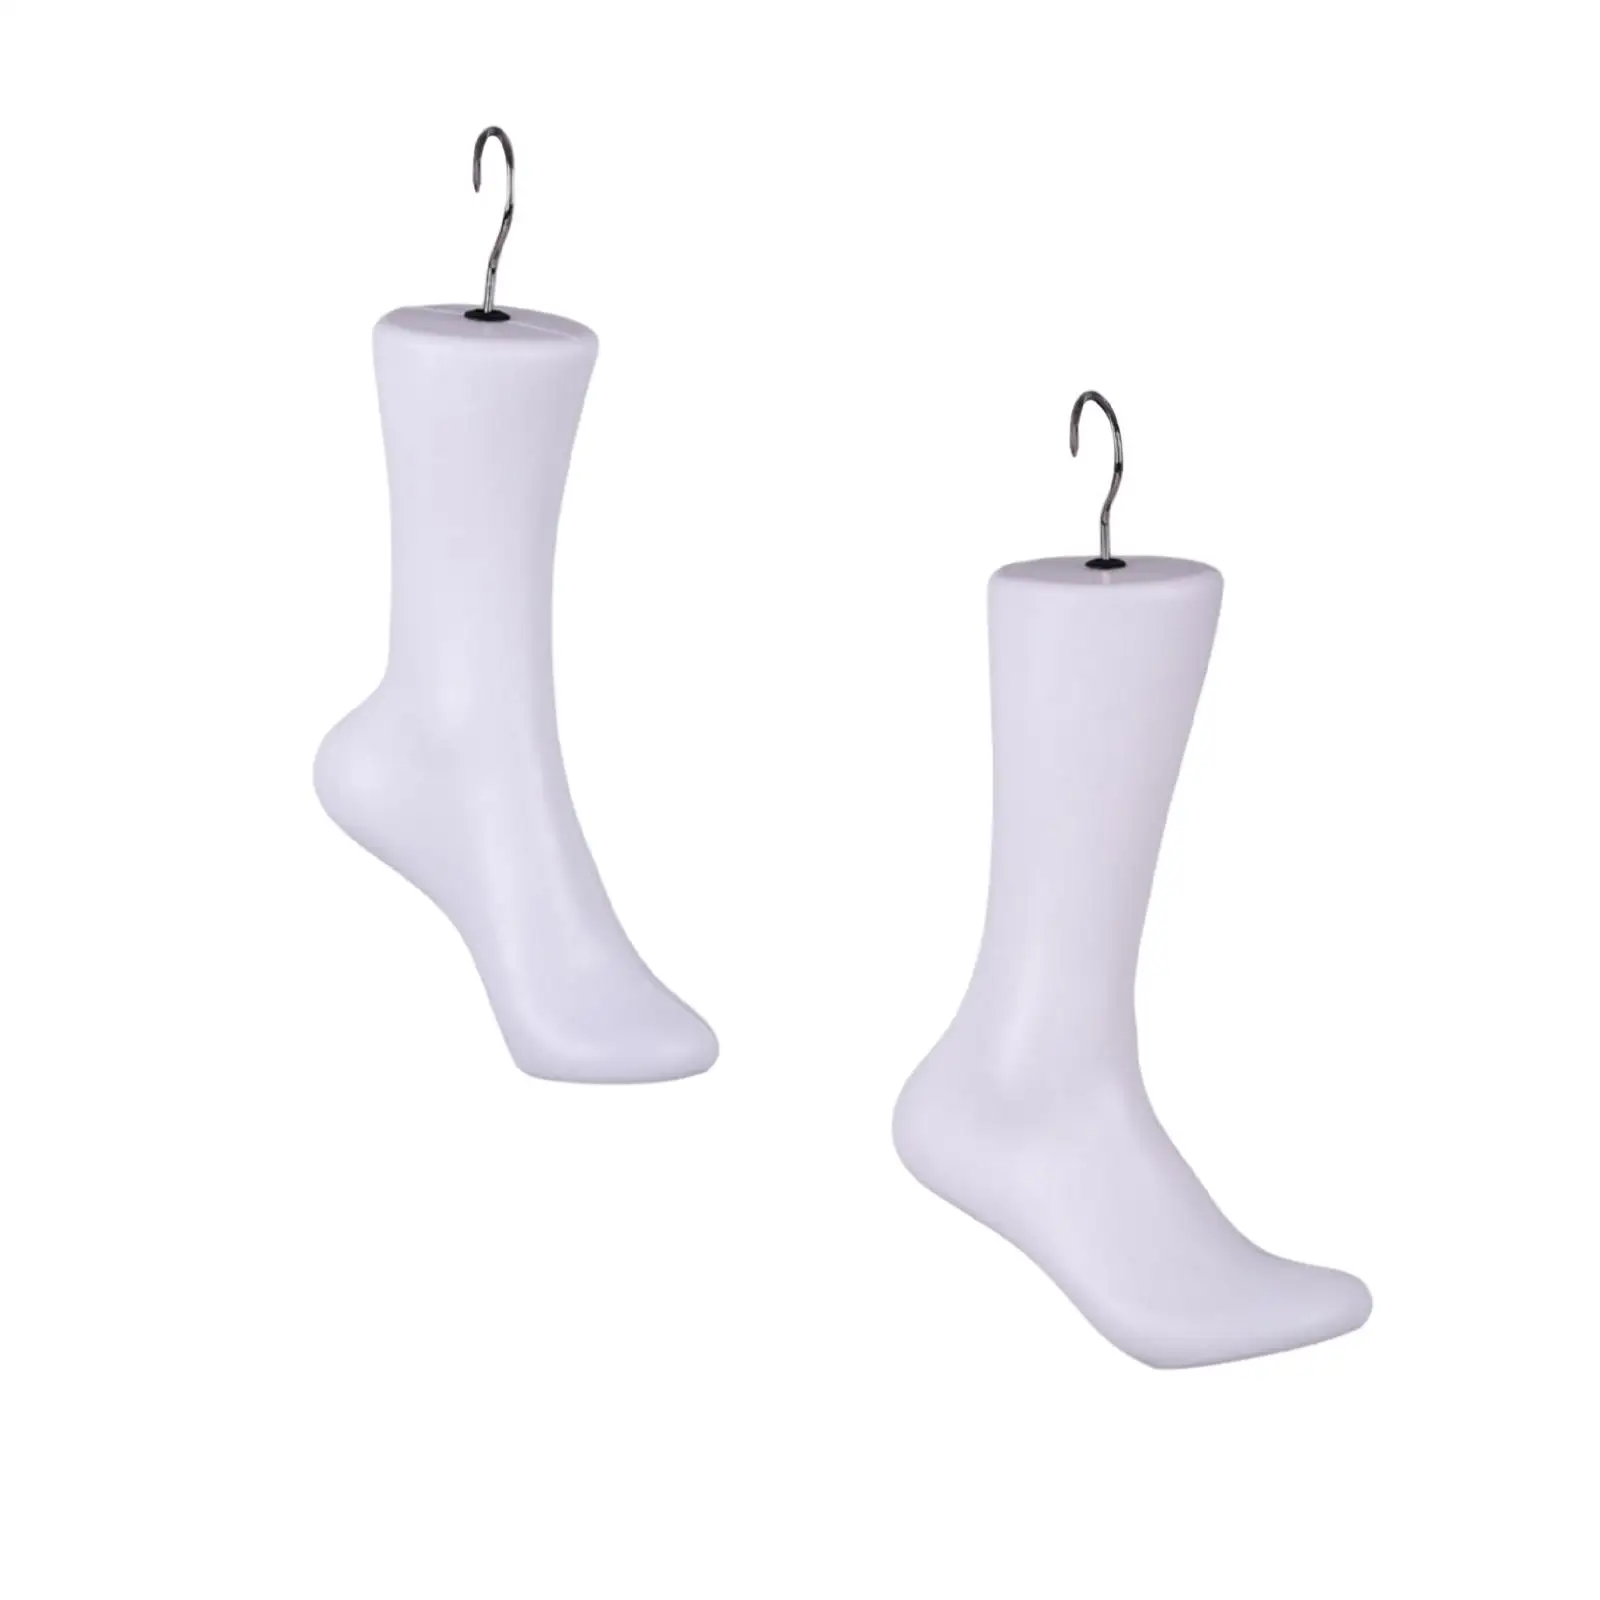 Mannequin Foot with Hook Shoes Displays Model Simulation Foot Model Foot Sock Display Model for Shop Retail Shoes Short Stocking